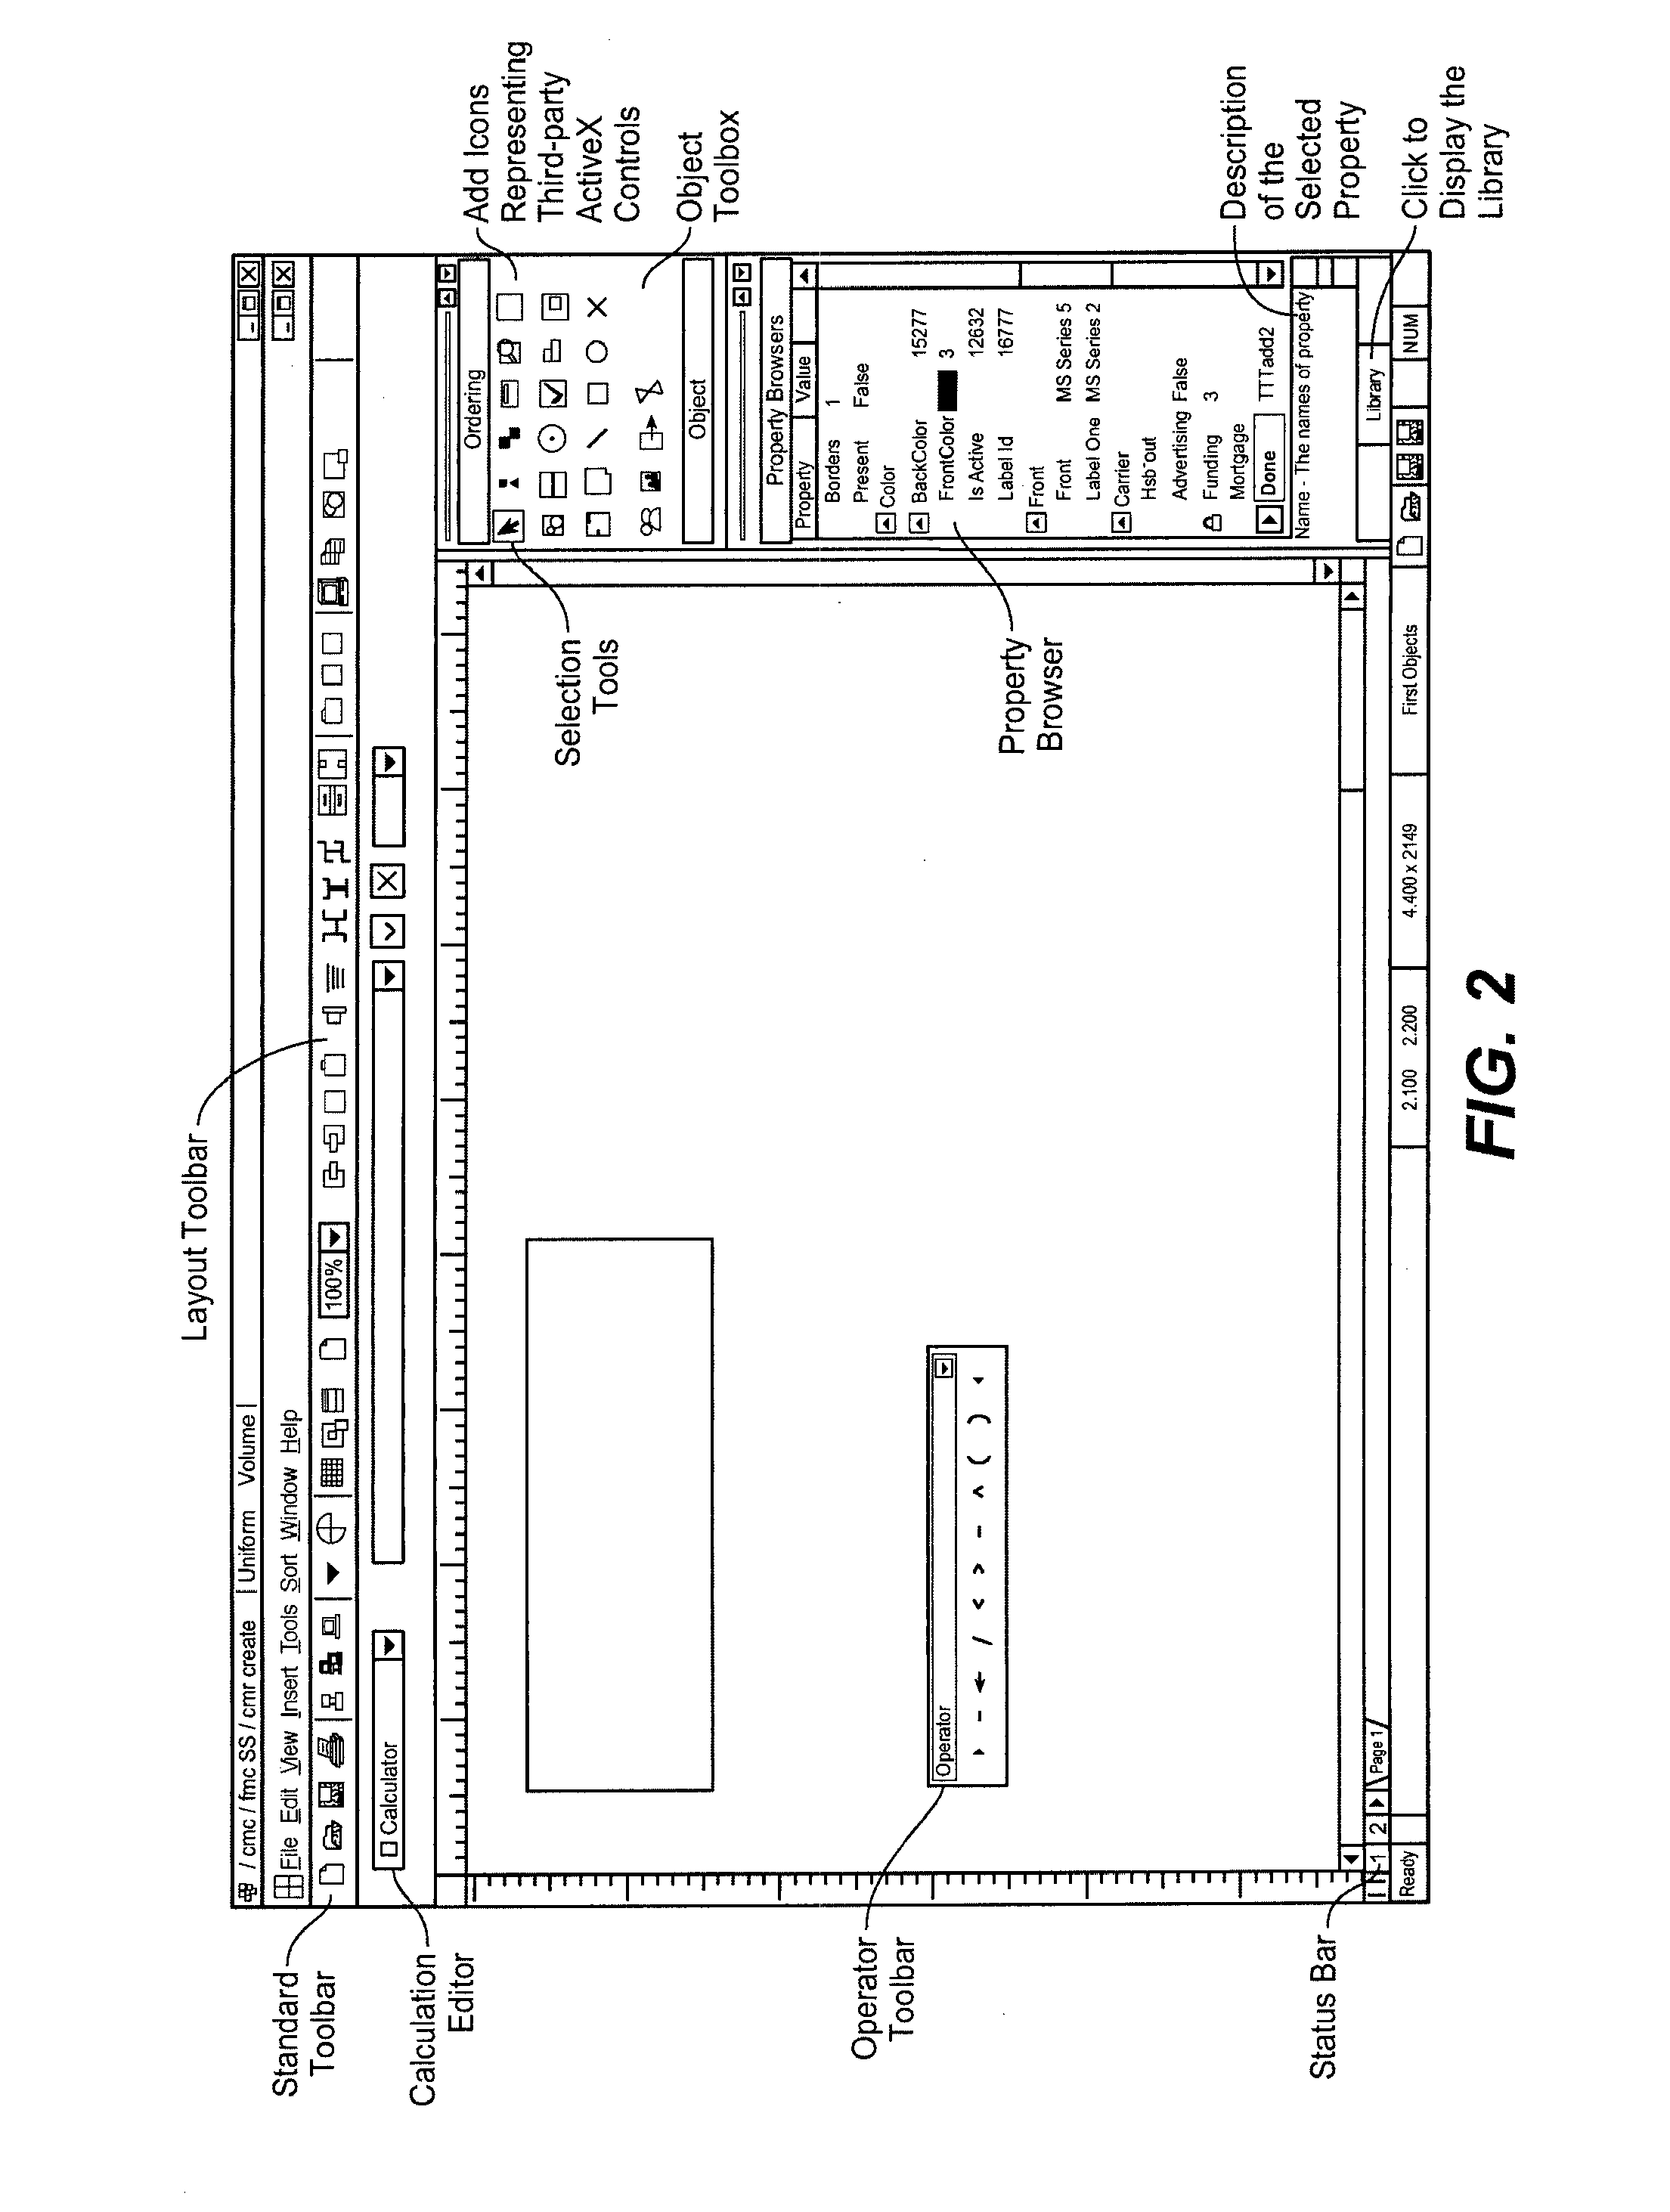 Method and System for Cross-Platform Form Creation and Deployment